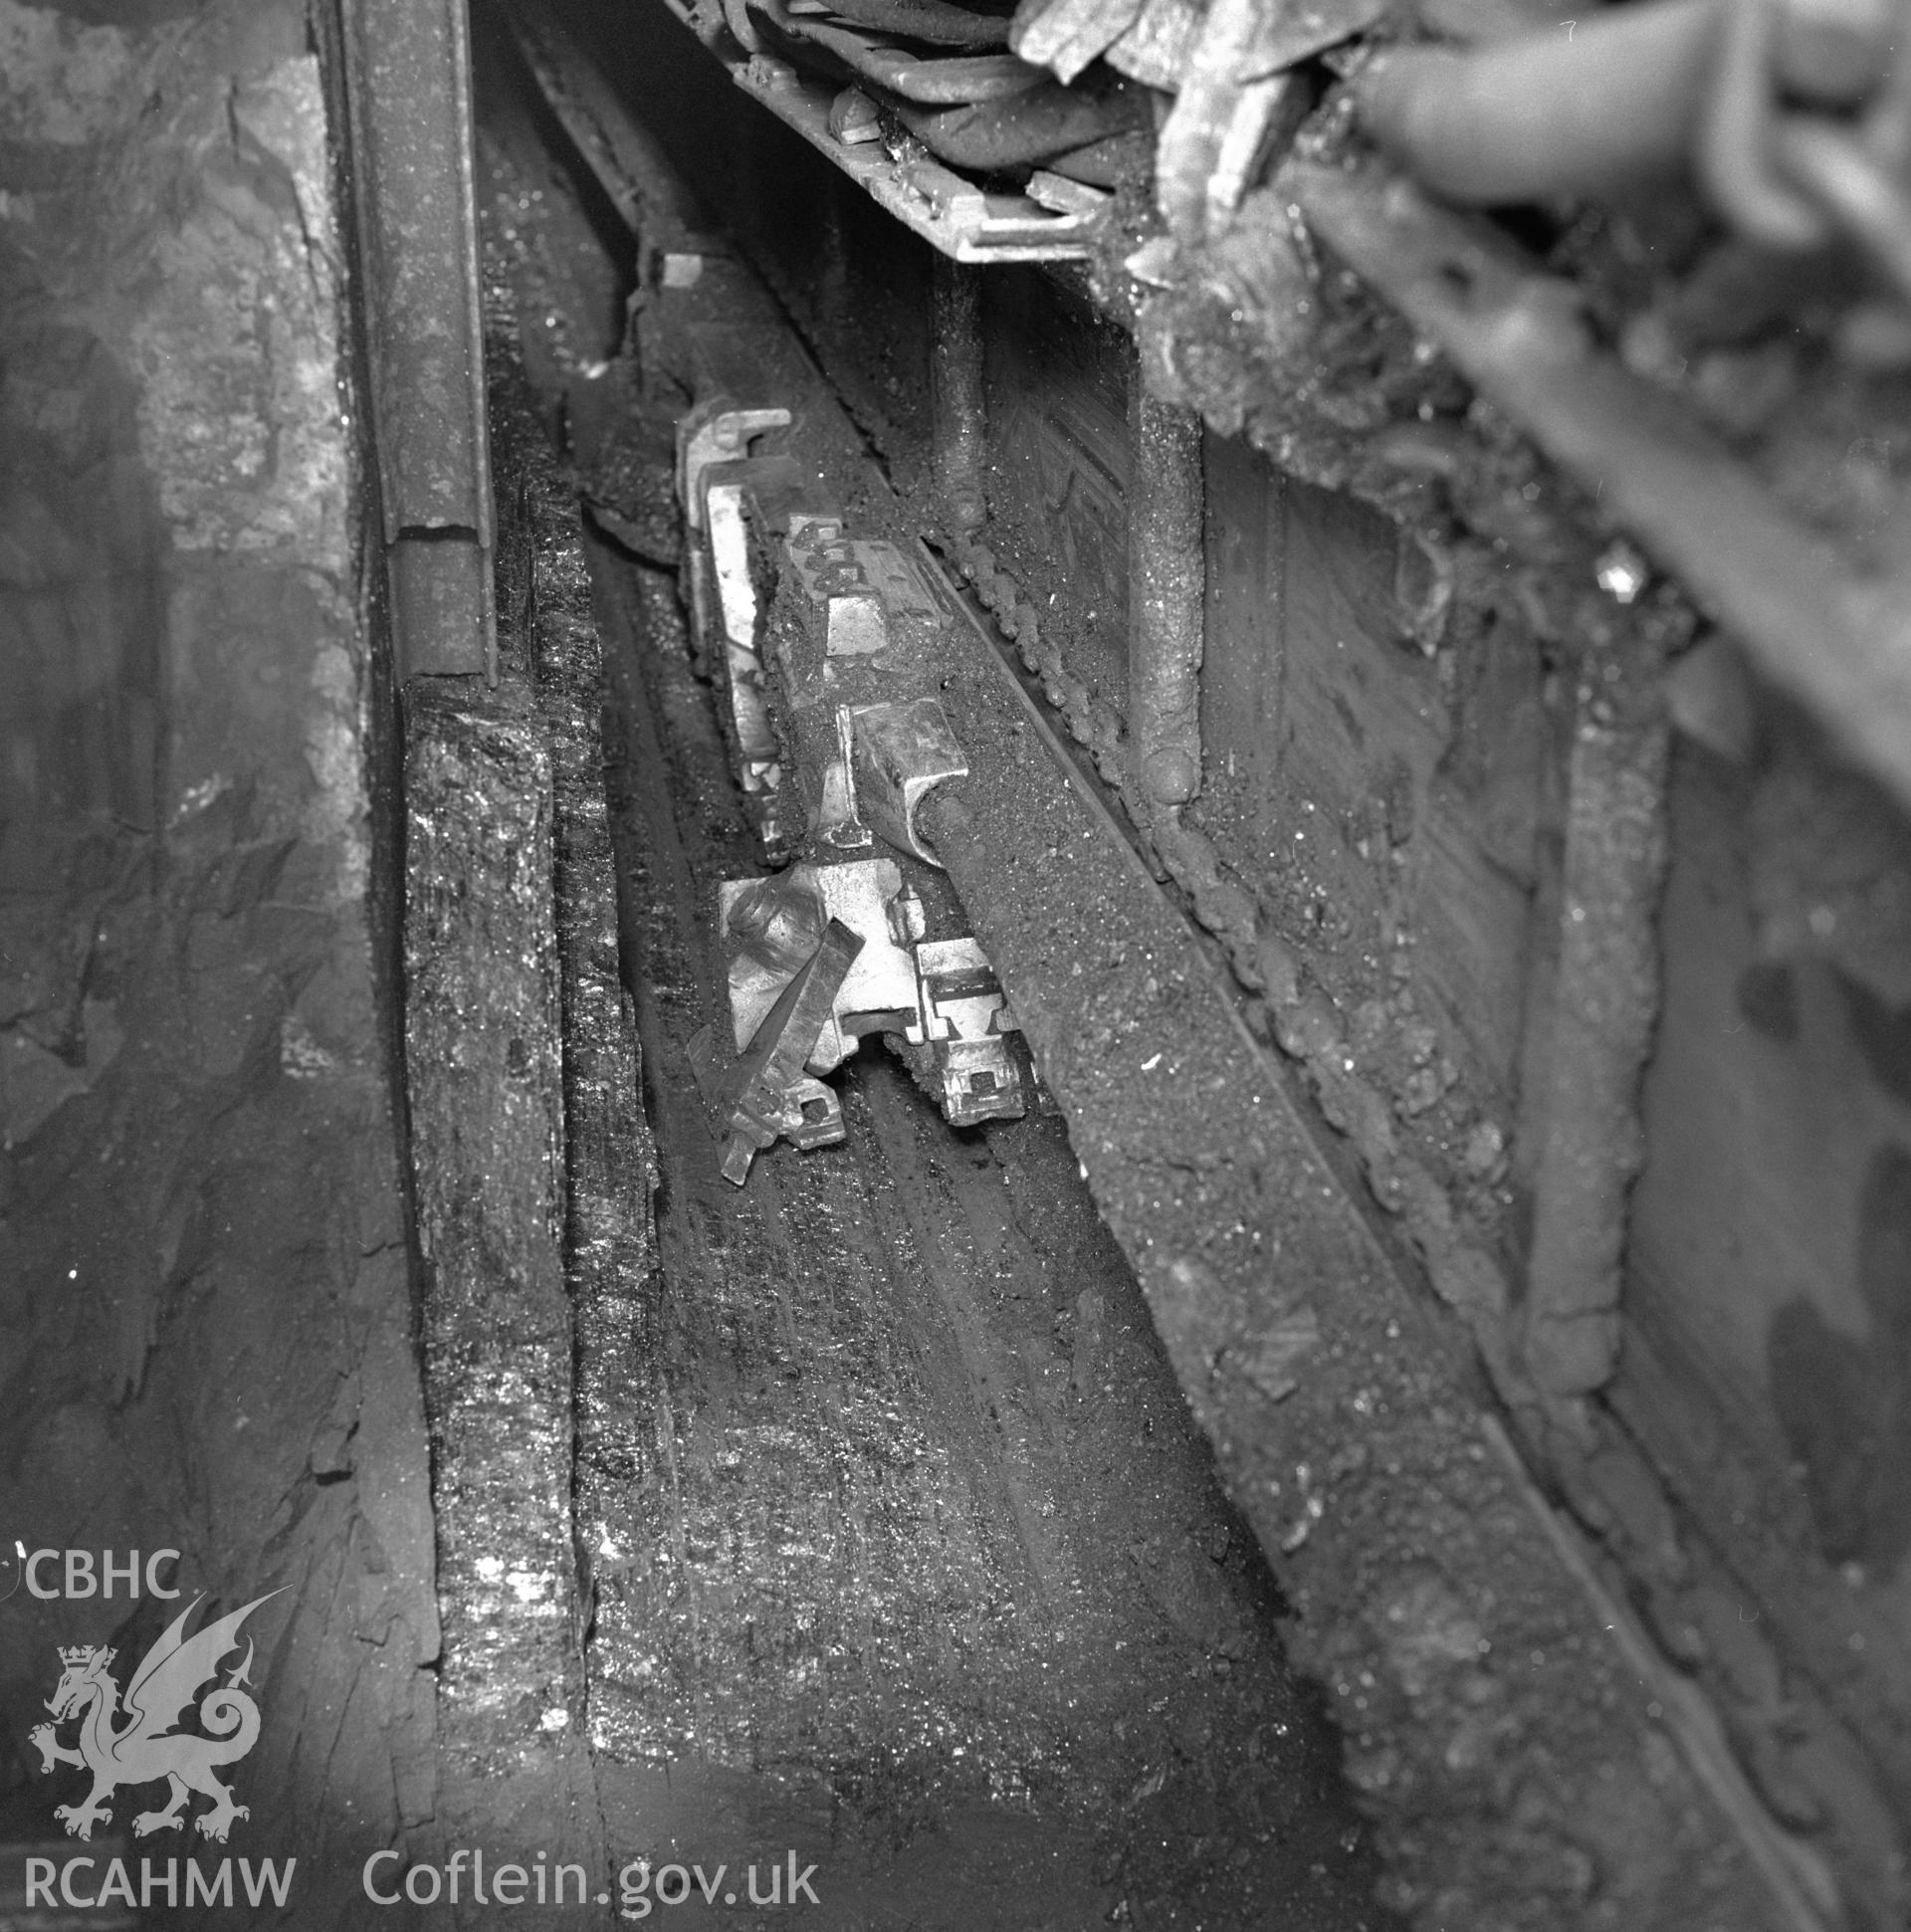 Digital copy of an acetate negative showing Big Pit - New Mine, G11 face, from the John Cornwell Collection.